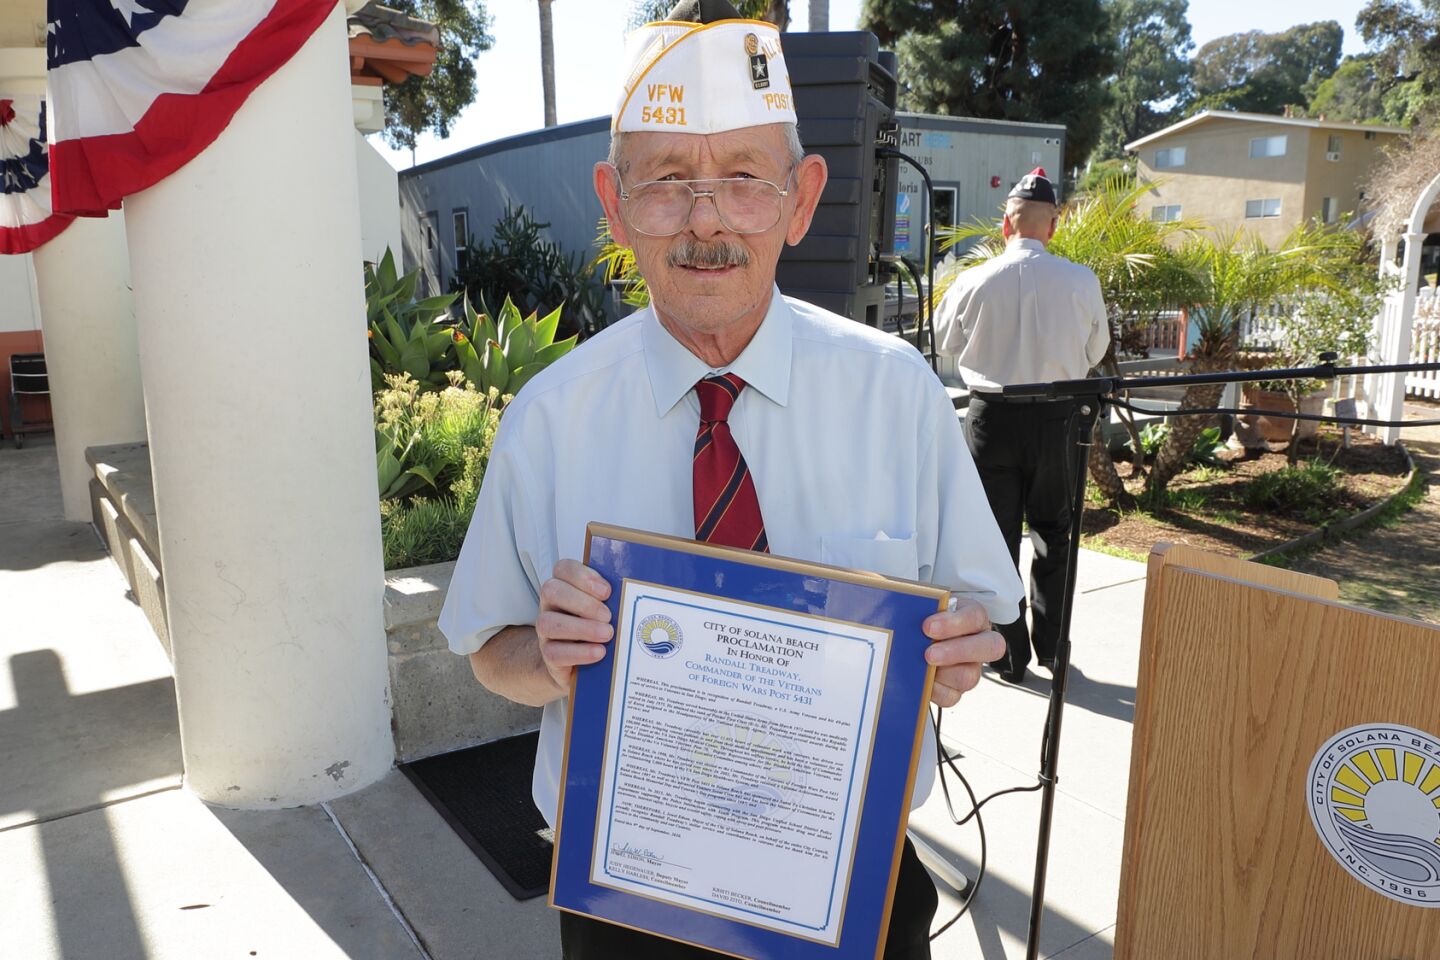 Randy Treadway with the proclamation from the Solana Beach honoring his dedication to veterans, the community, and his country.